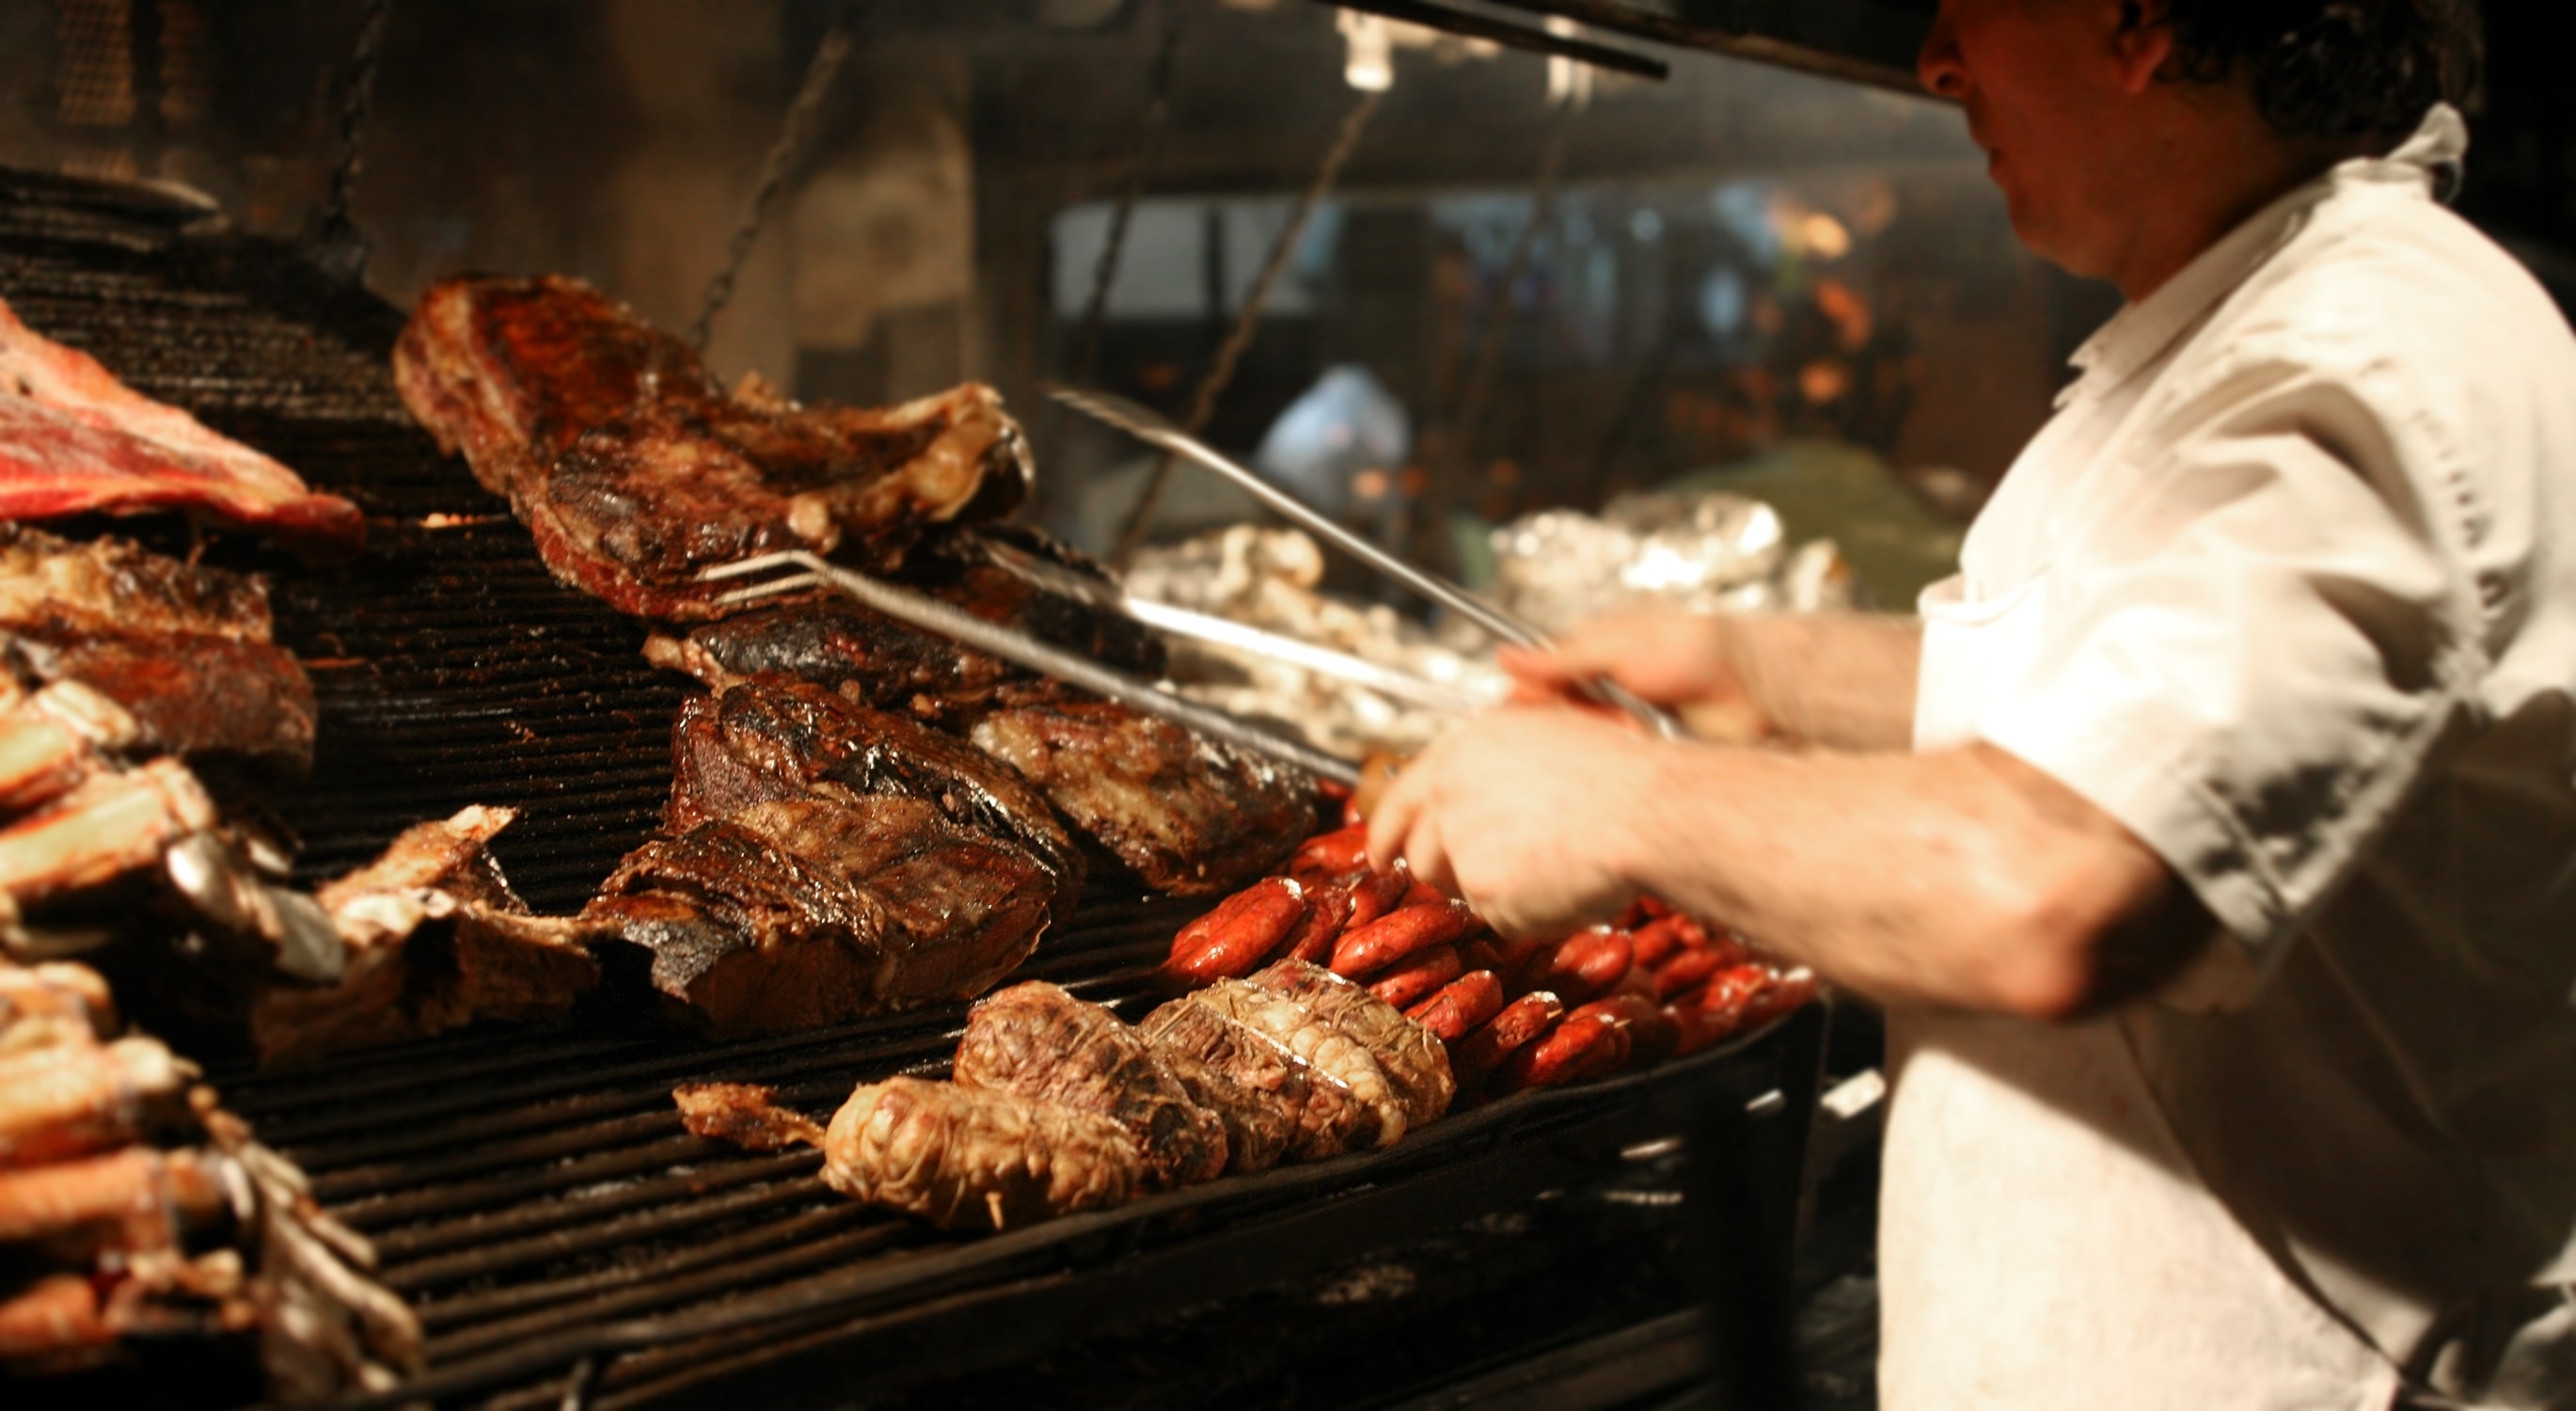 Barbecue Accidents: Grilling Safety Tips